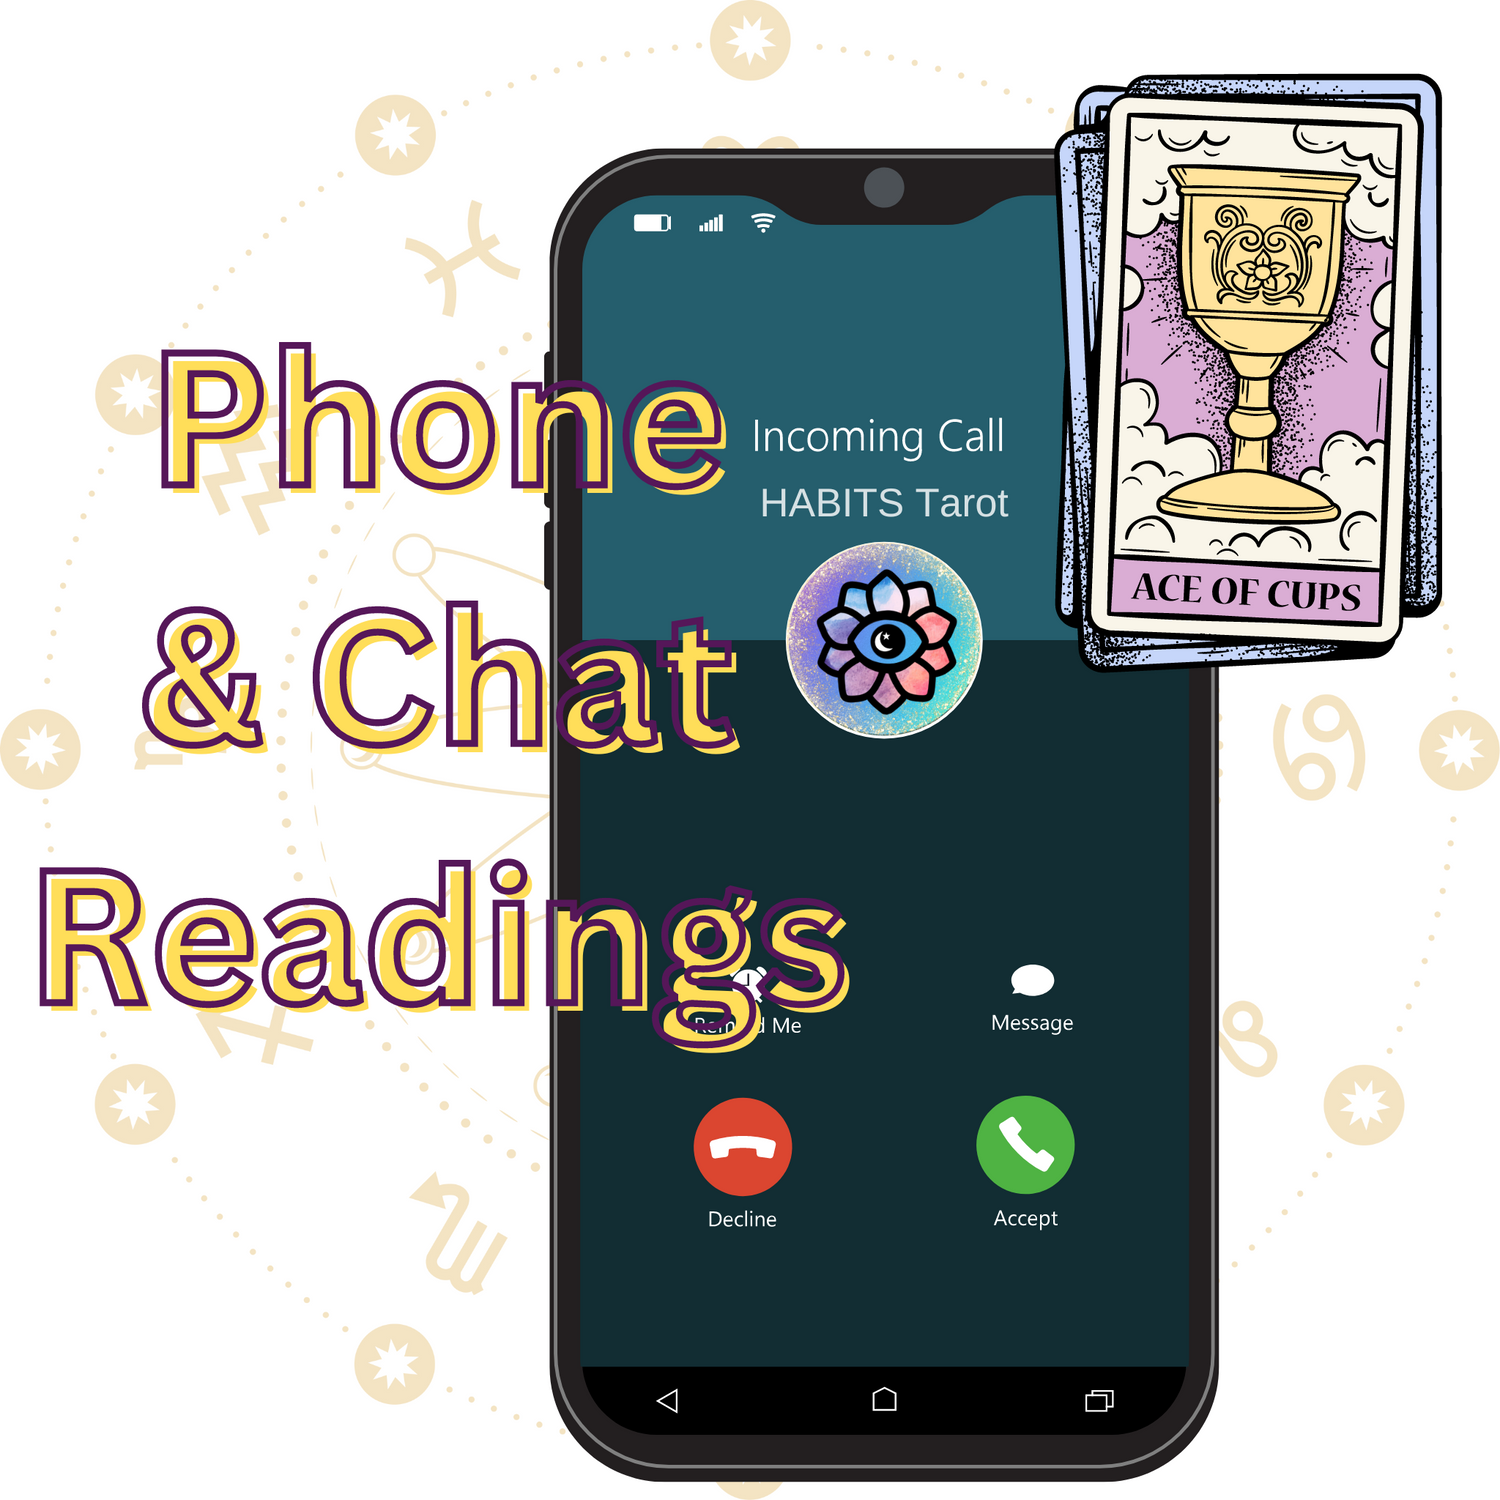 Phone and Chat Readings